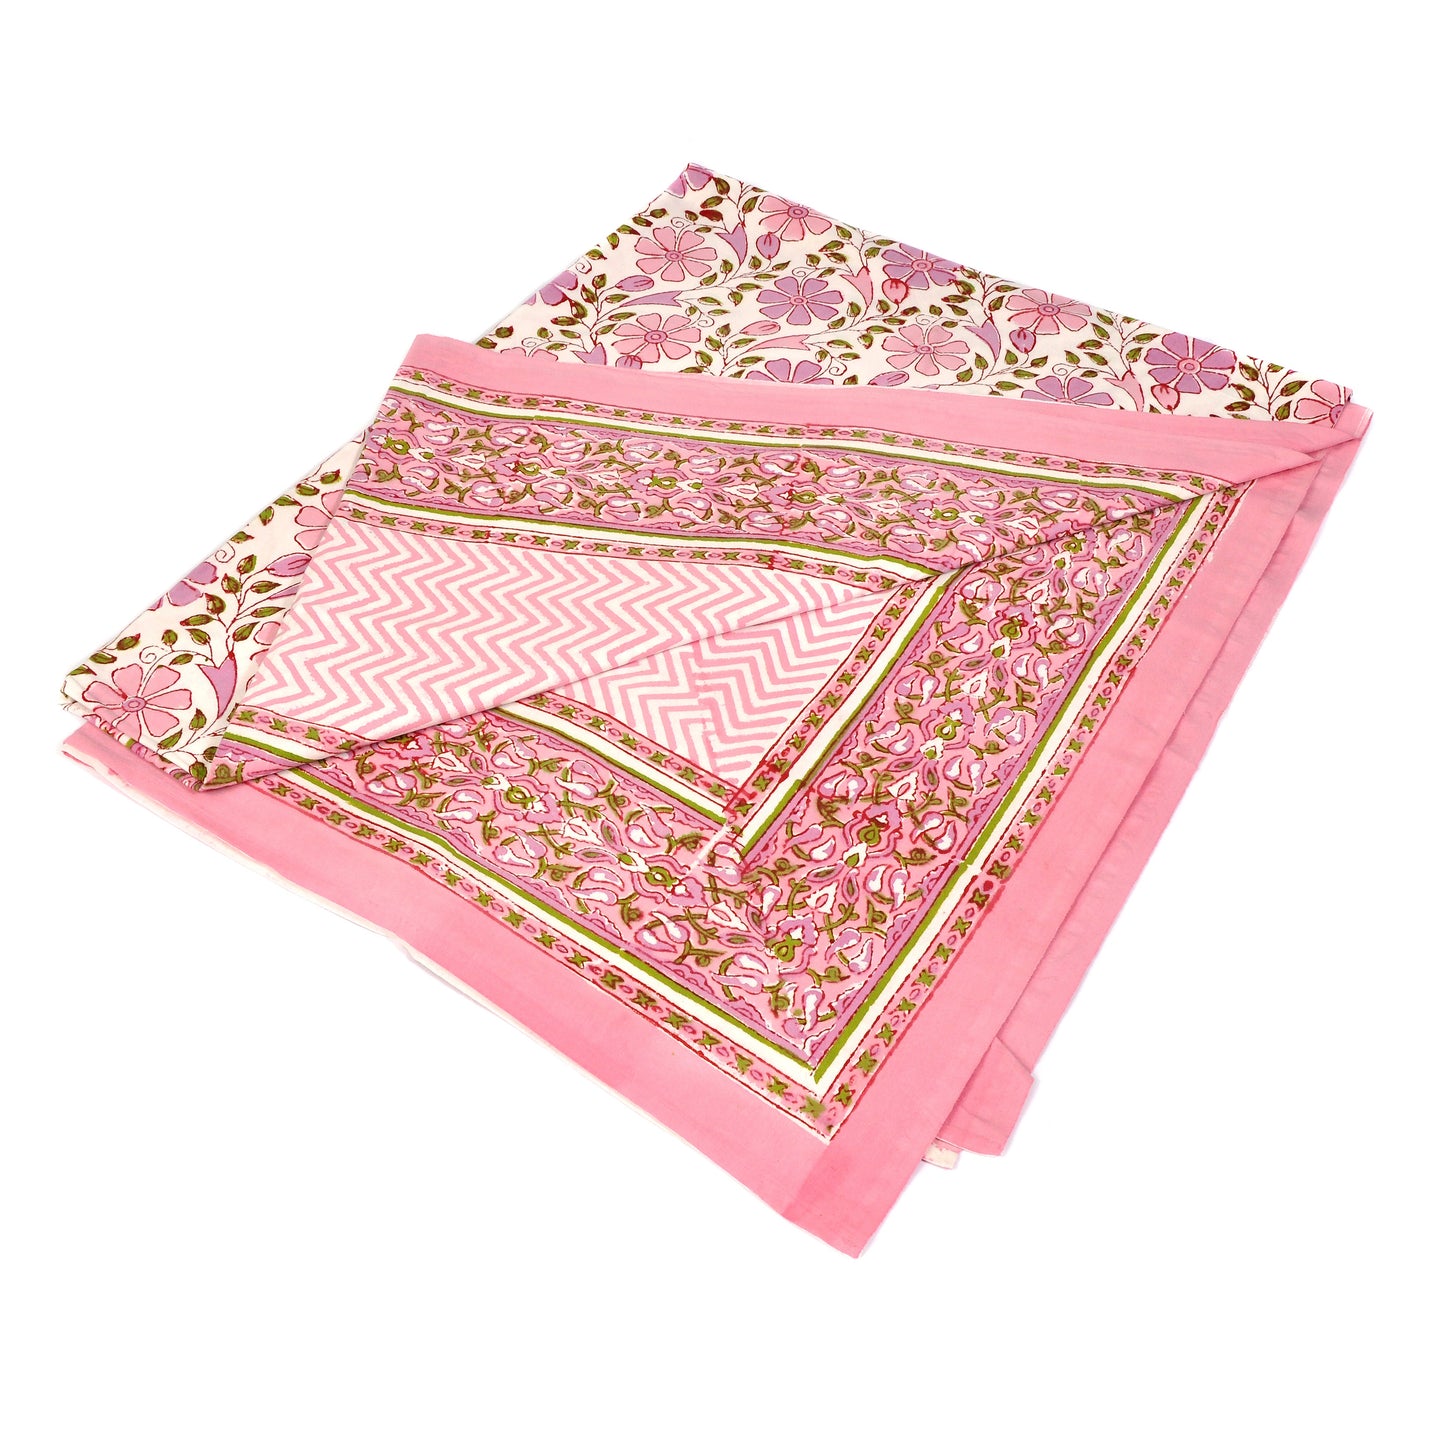 Pink Flowers and Zigzag Tablecloth Large Joanna Wood Shop